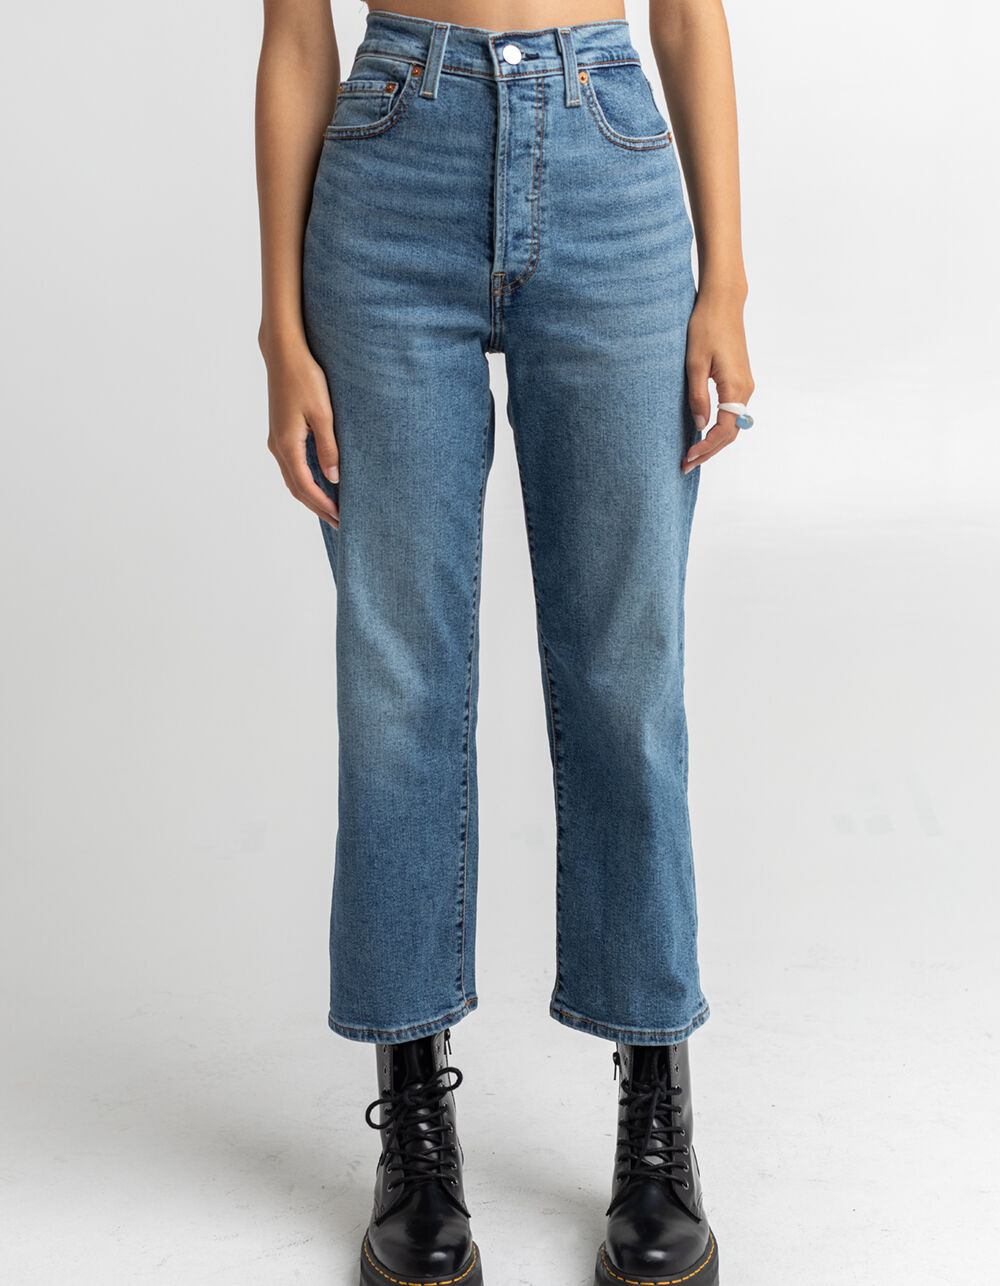 LEVI'S Ribcage Straight Ankle Womens Jeans - MED BLAST | Tillys